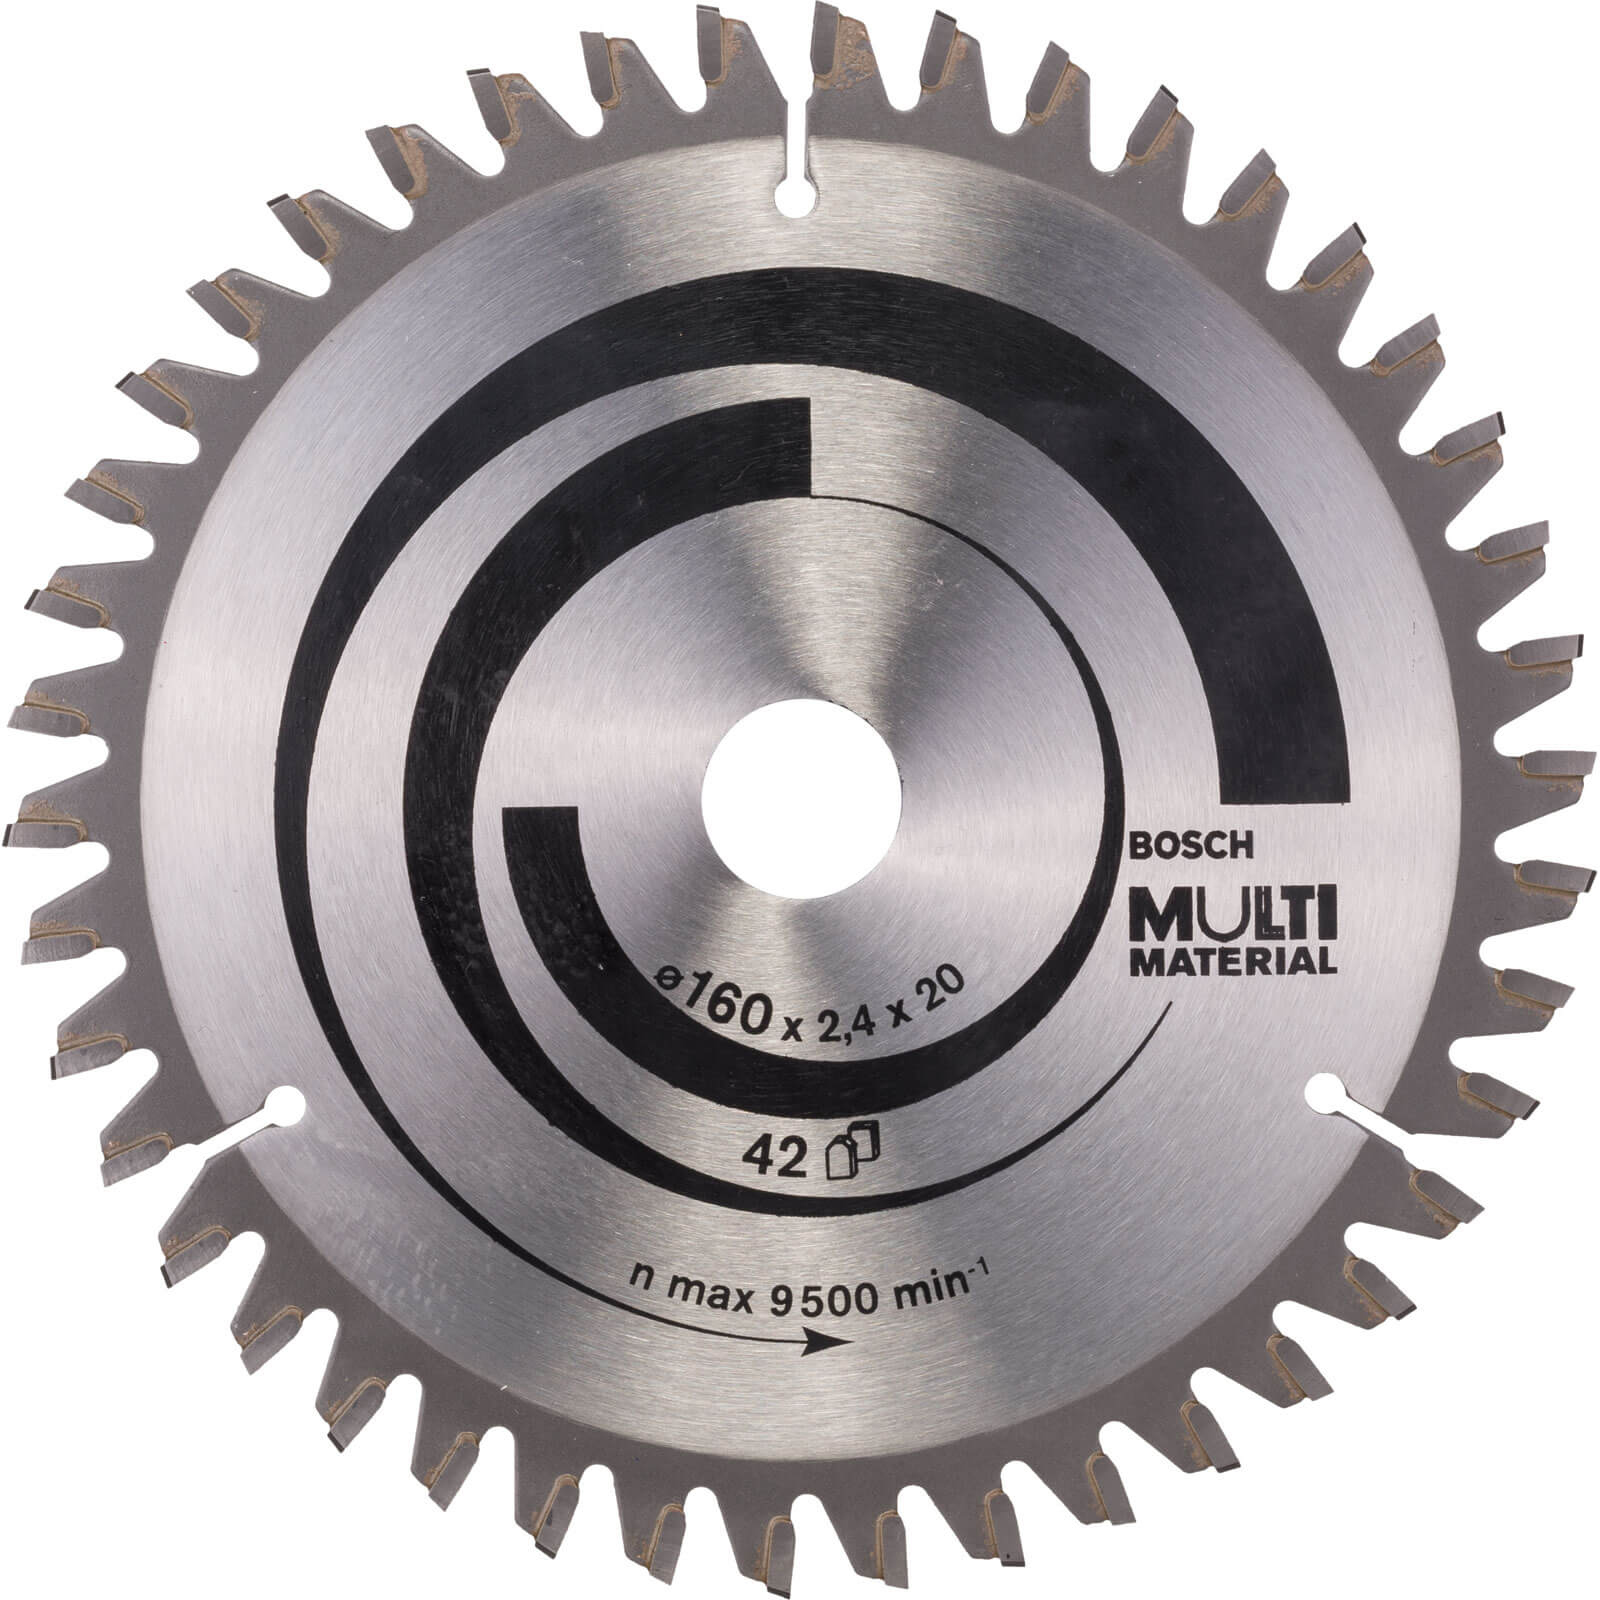 Image of Bosch Multi Material Cutting Saw Blade 160mm 42T 20mm